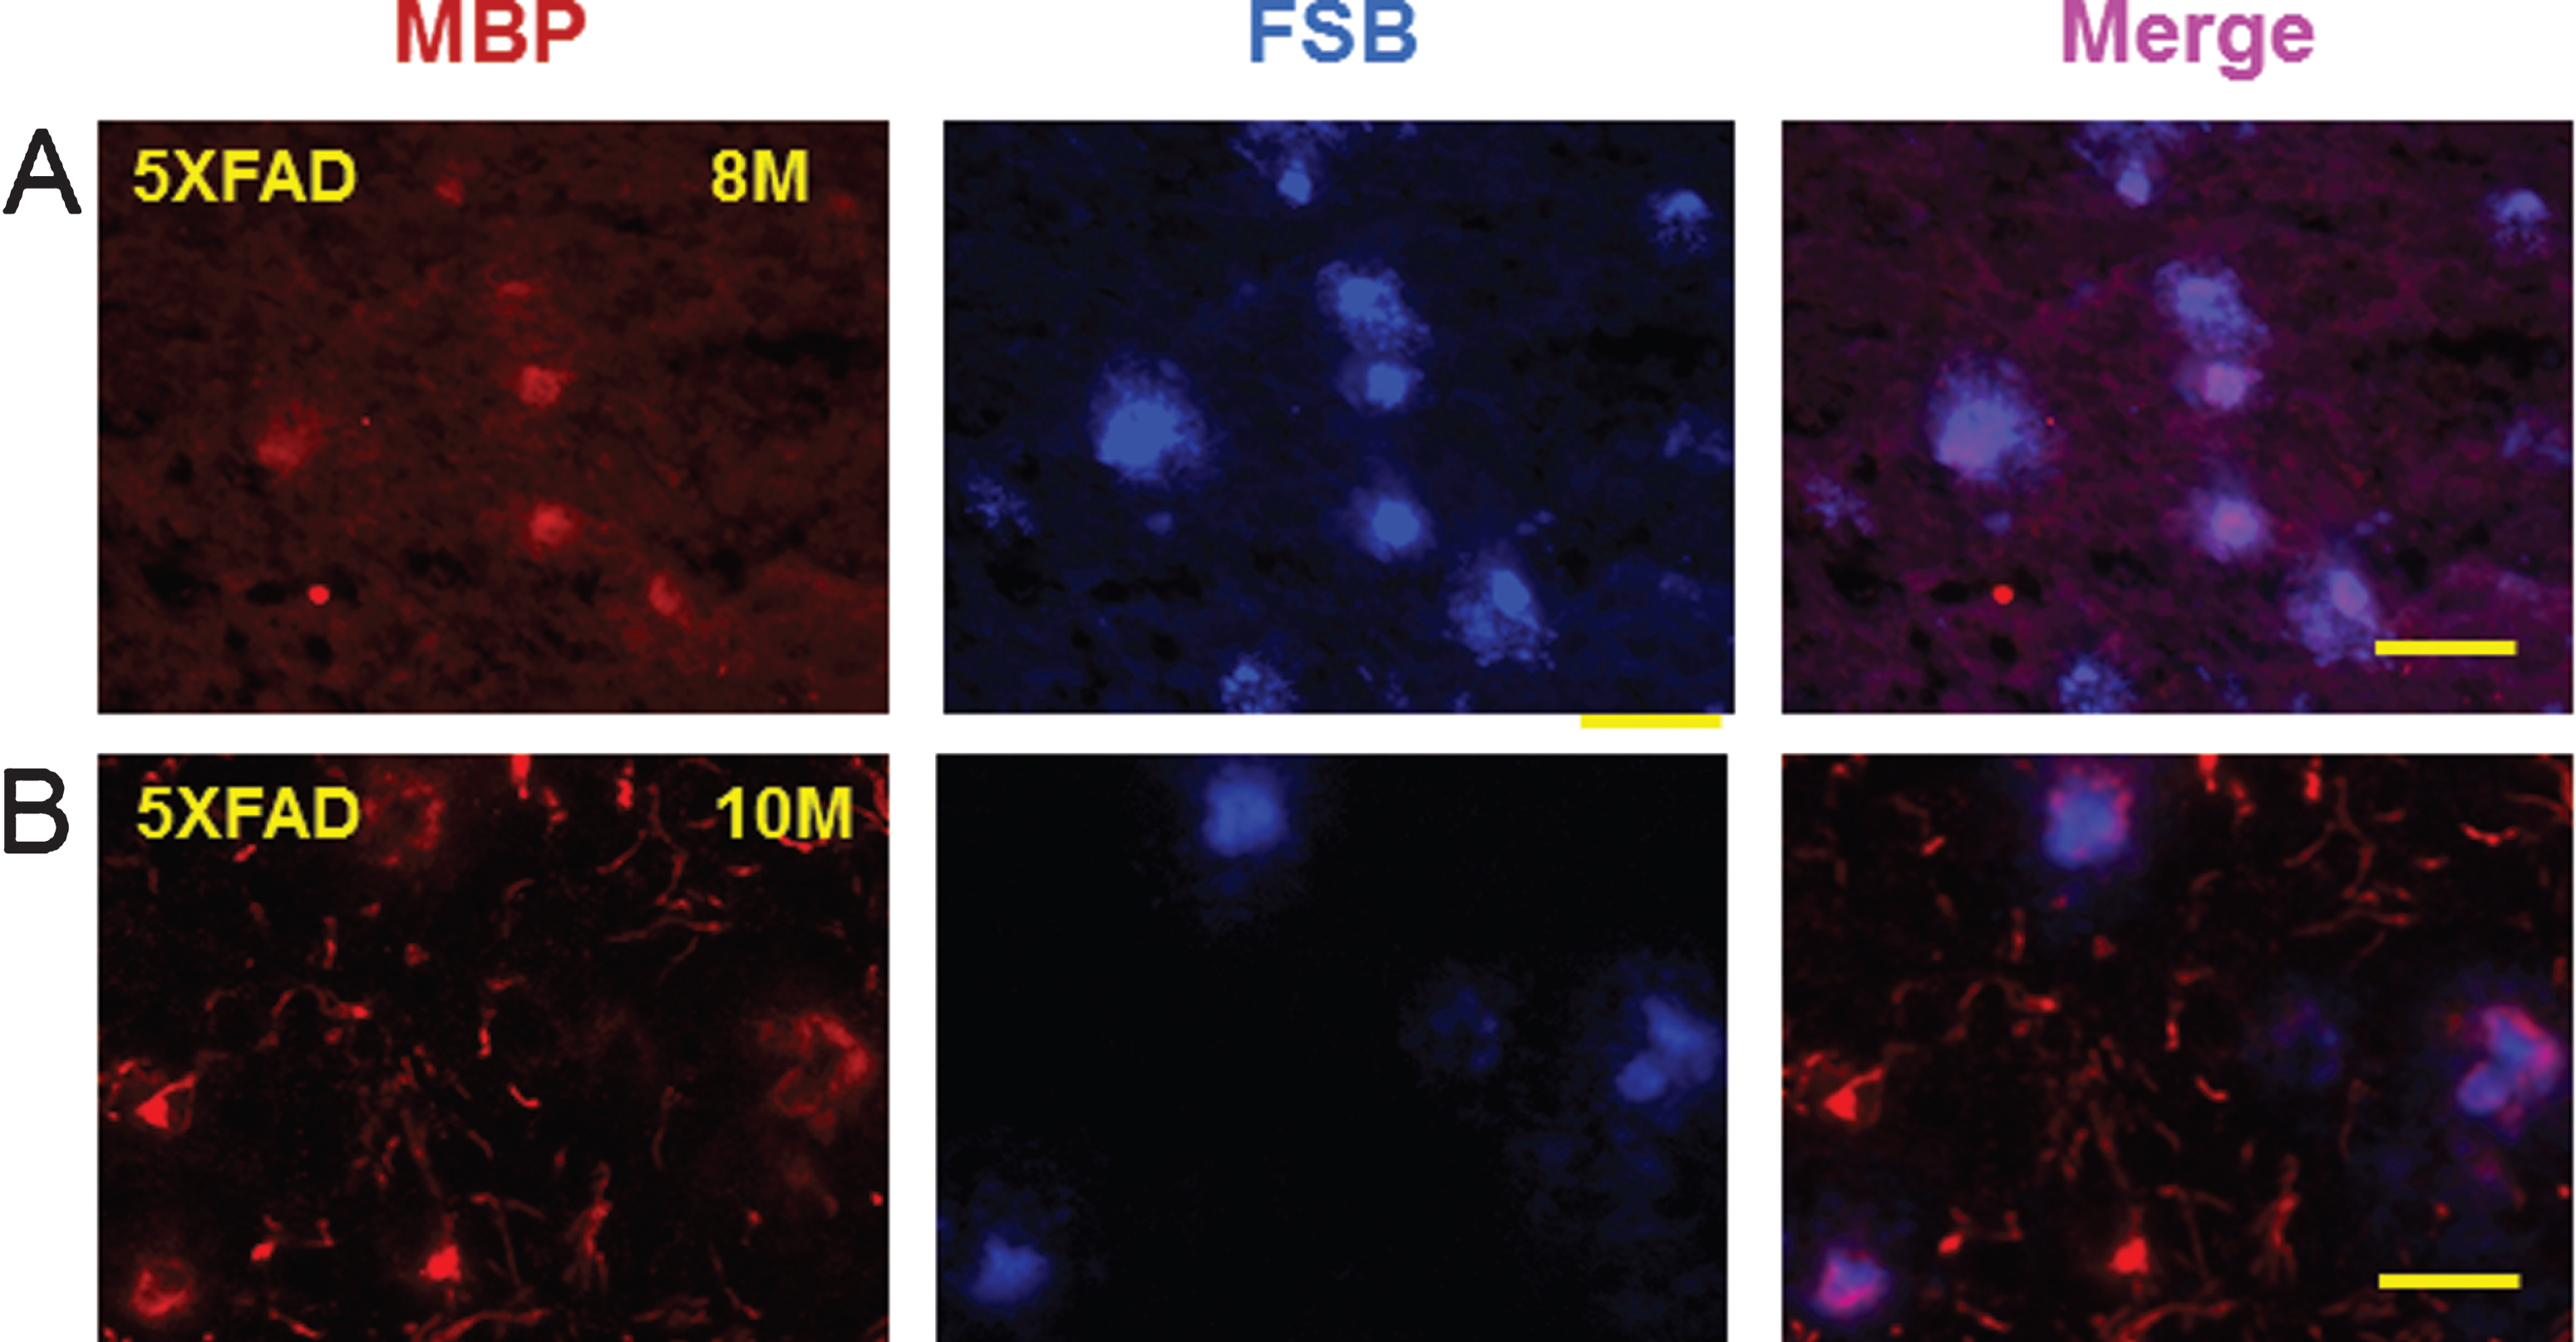 Double staining of myelin basic protein (MBP) and (E, E)-1-fluoro-2,5-bis (3-hydroxycarbonyl-4-hydroxy) styrylbenzene (FSB) in the amyloid plaques of 5XFAD mice. MBP positive myelin aggregates were detected in cortex of 8 month (8M, left panel) old (A) and 10 month (10M, left panel) old (b) 5XFAD mice. These MBP myelin aggregates co-localized (Merge) with FSB stained amyloid plaques in the cortex of 8 month old (8M, middle upper panel) and 10 month (10M, middle lower panel) old 5XFAD mice. MBP aggregates at 10 months (10M) seemed somewhat fragmented (B). The FSB stained plaques co-localized with MBP staining in 8M (upper right panel) and 10M (lower right panel) old animals (Merge). Bar = 50 μm.